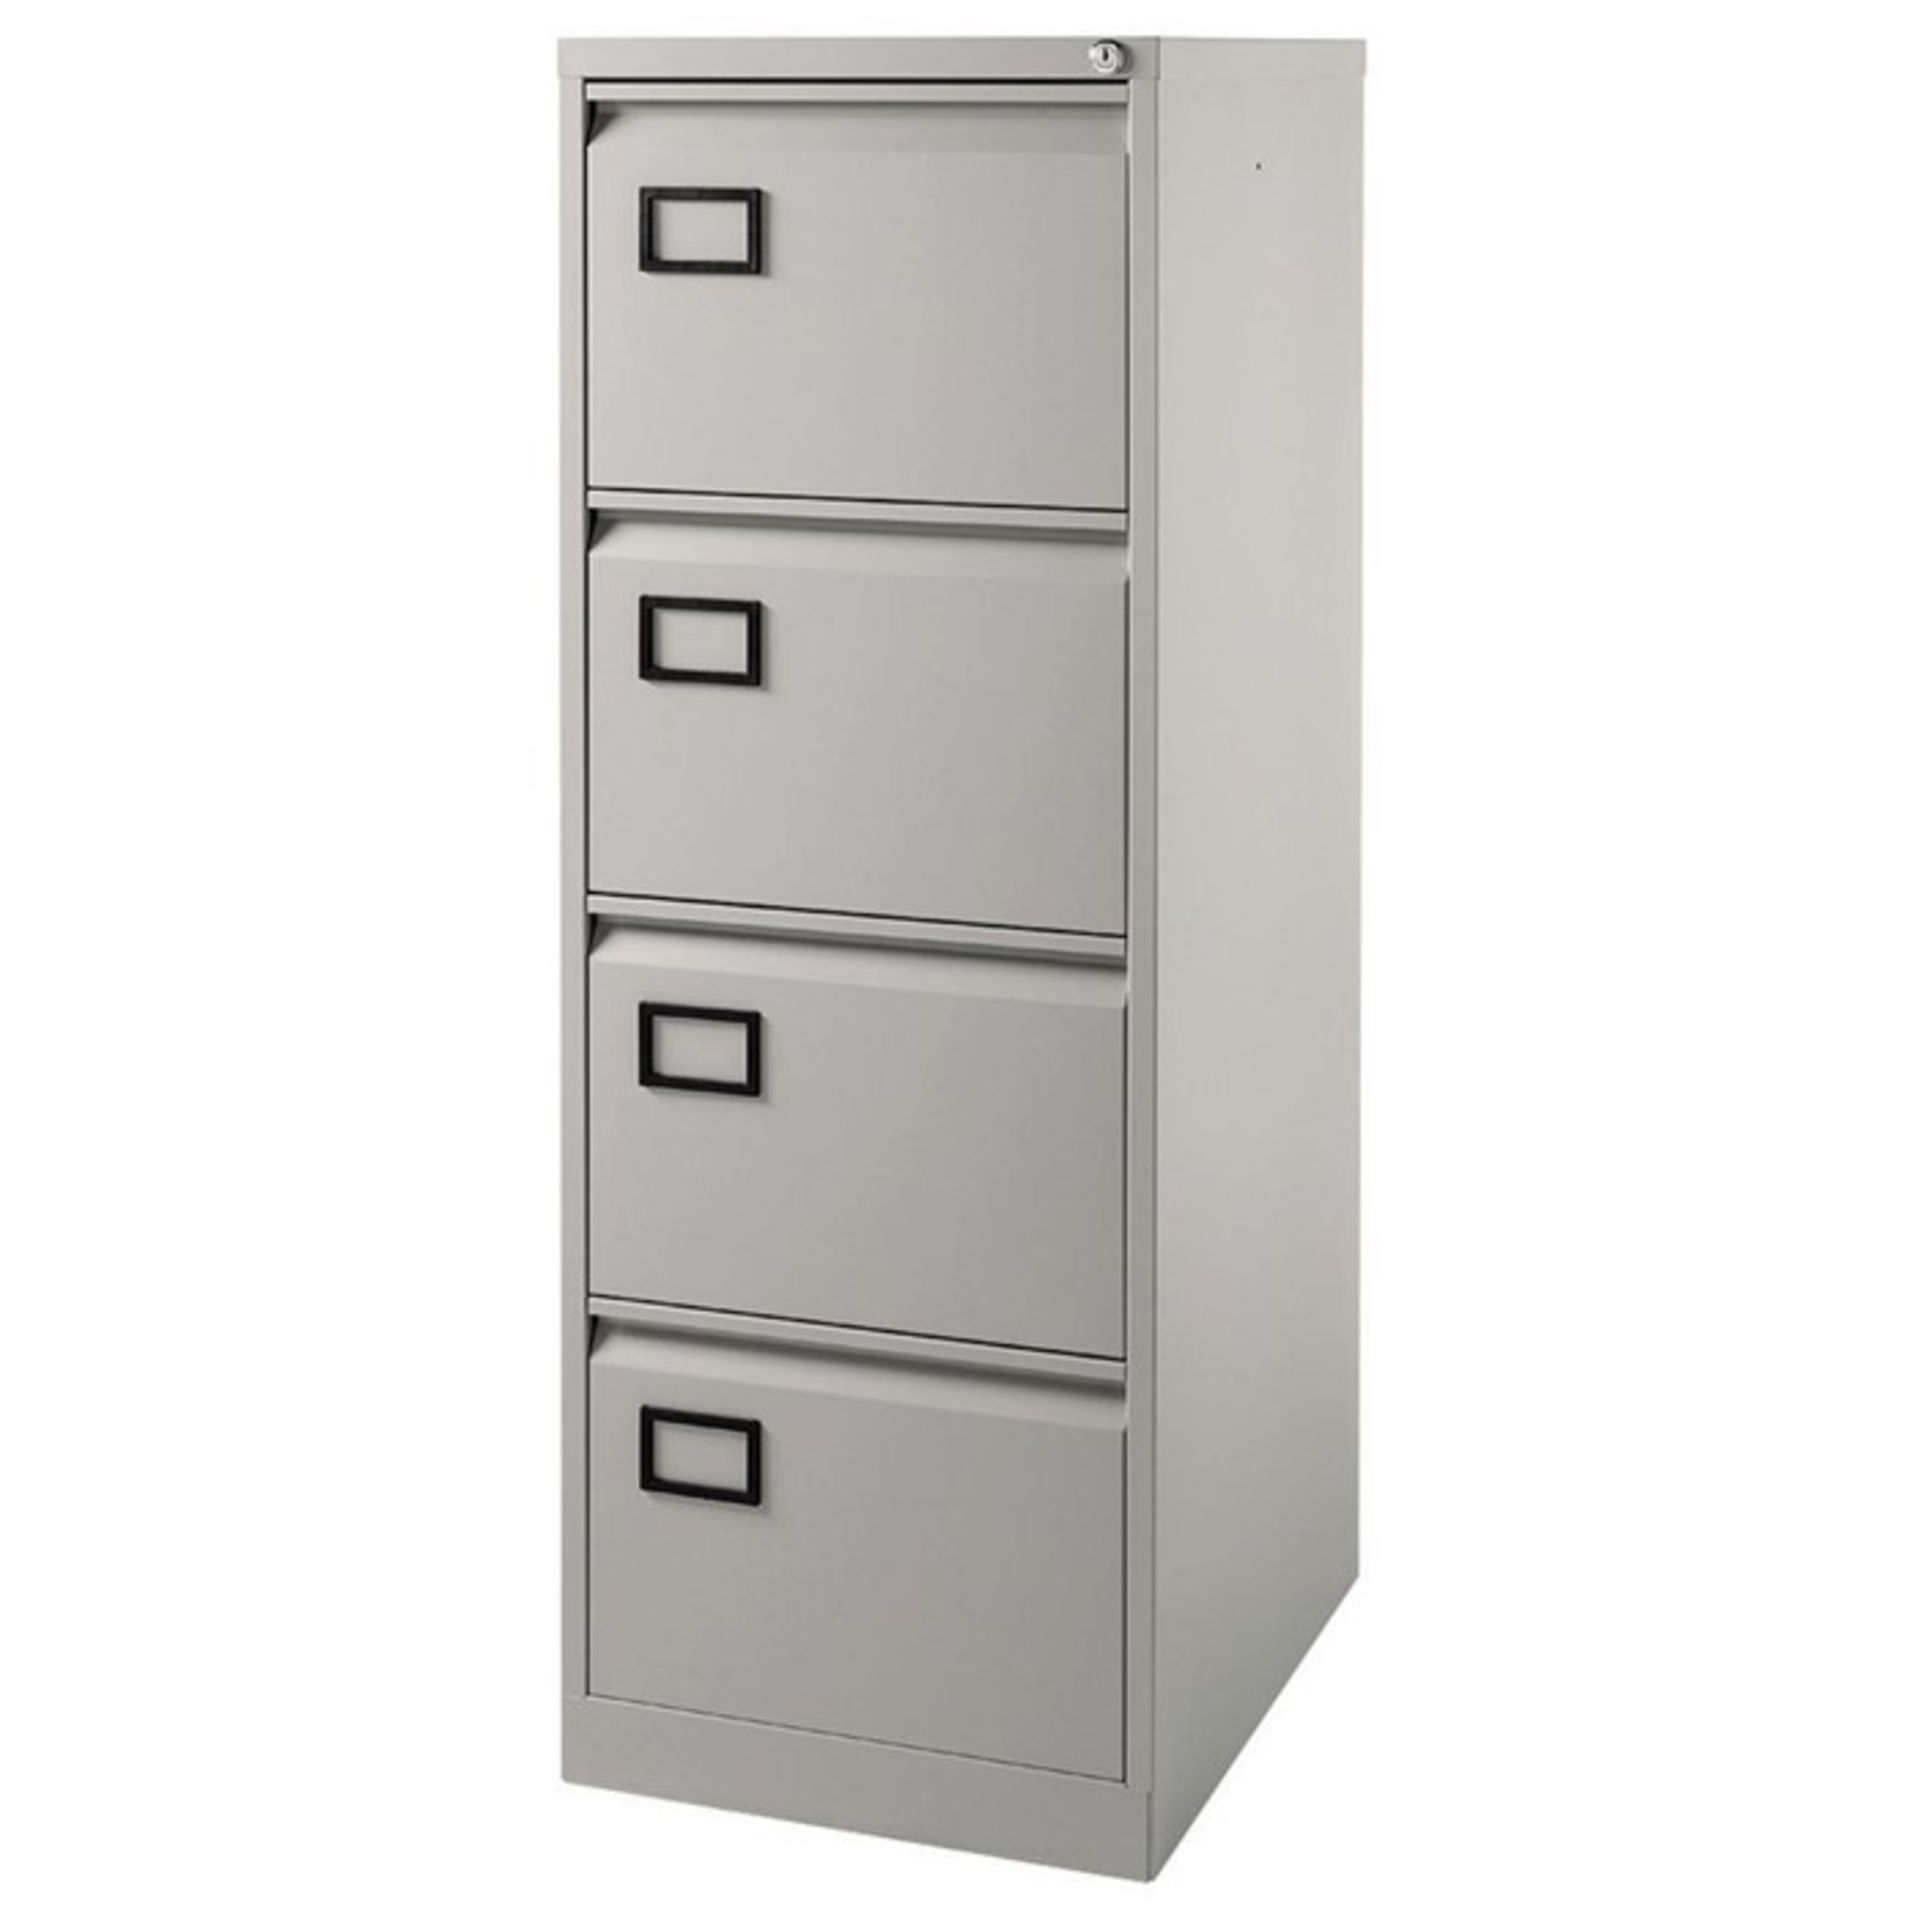 1 GRADE B ASSEMBLED 4 DRAWER FLUSH FRONT FILING CABINET IN LIGHT GREY / RRP £172.99 (VIEWING